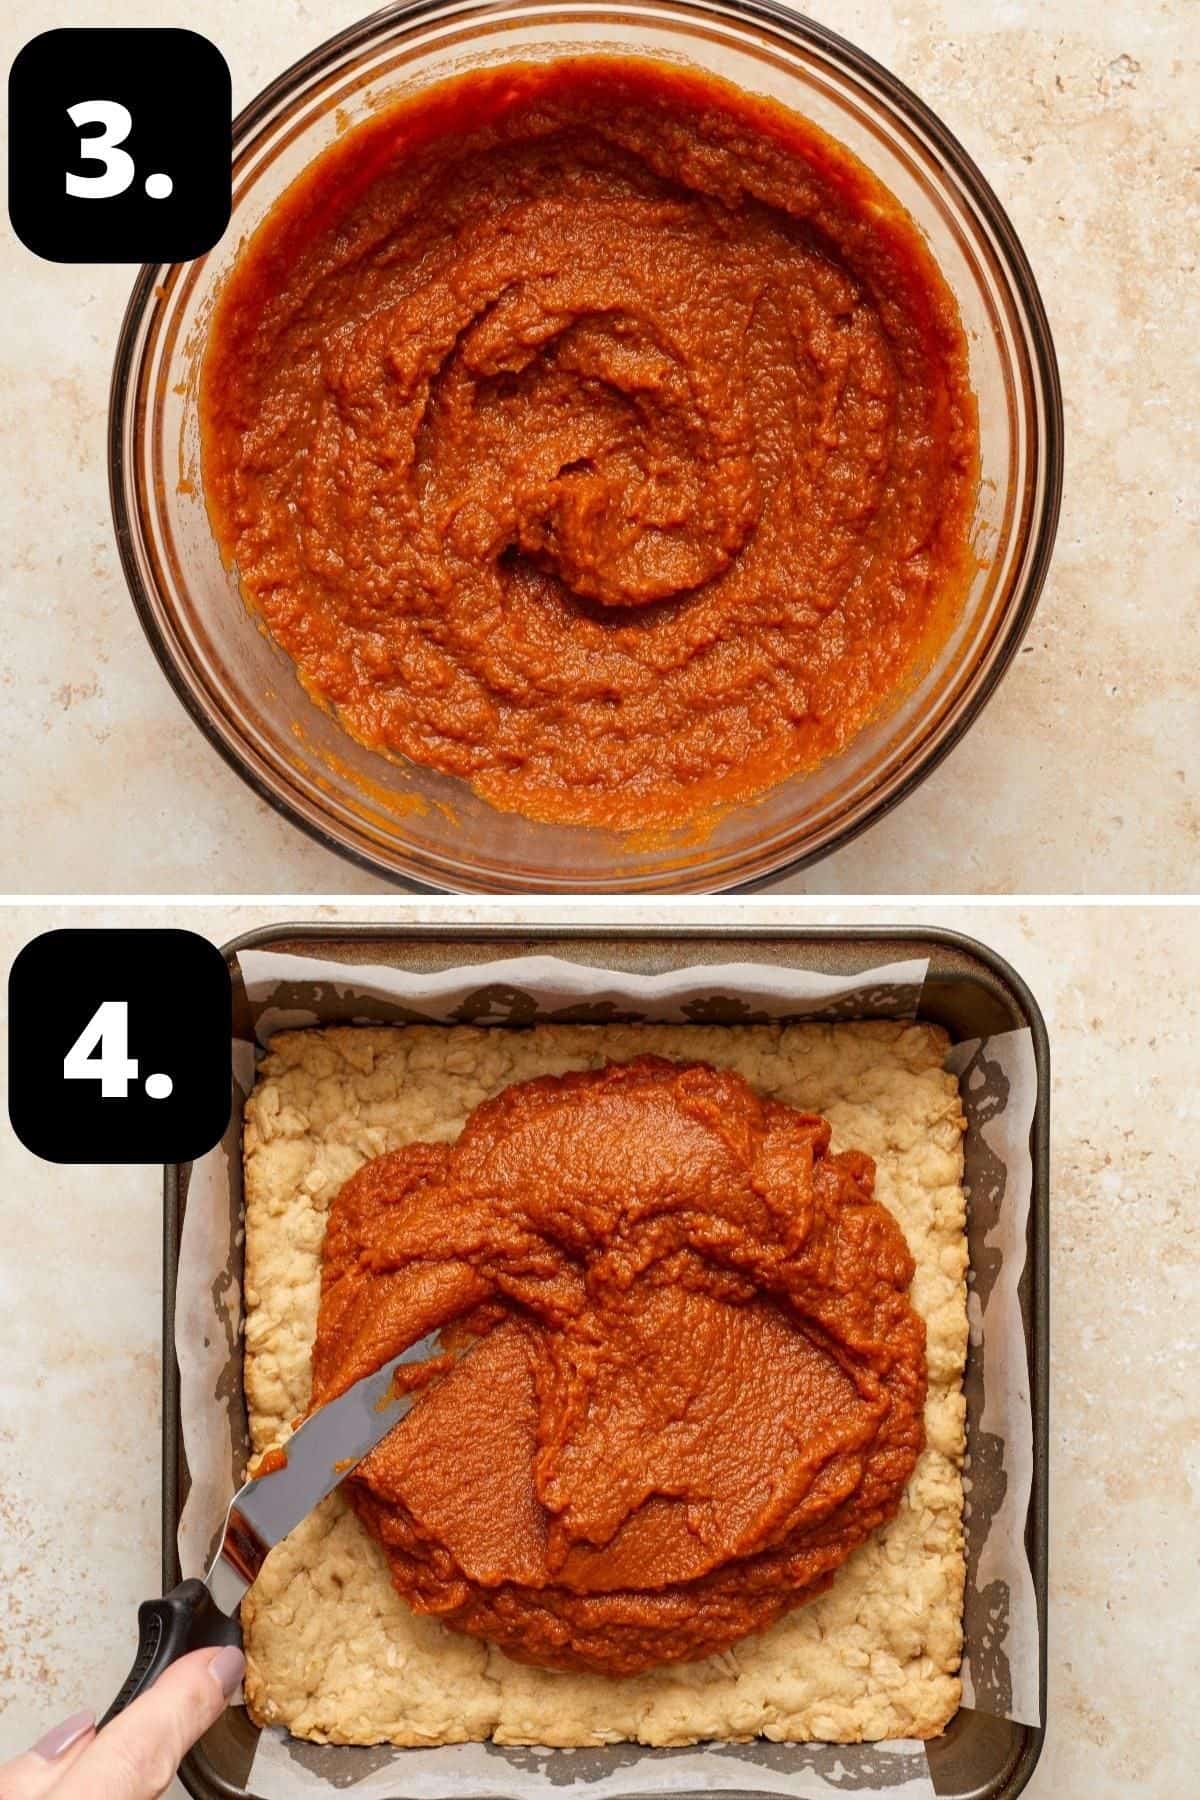 Steps 3-4 of preparing this recipe: preparing the pumpkin filling in a glass bowl and topping the base with the mixture.